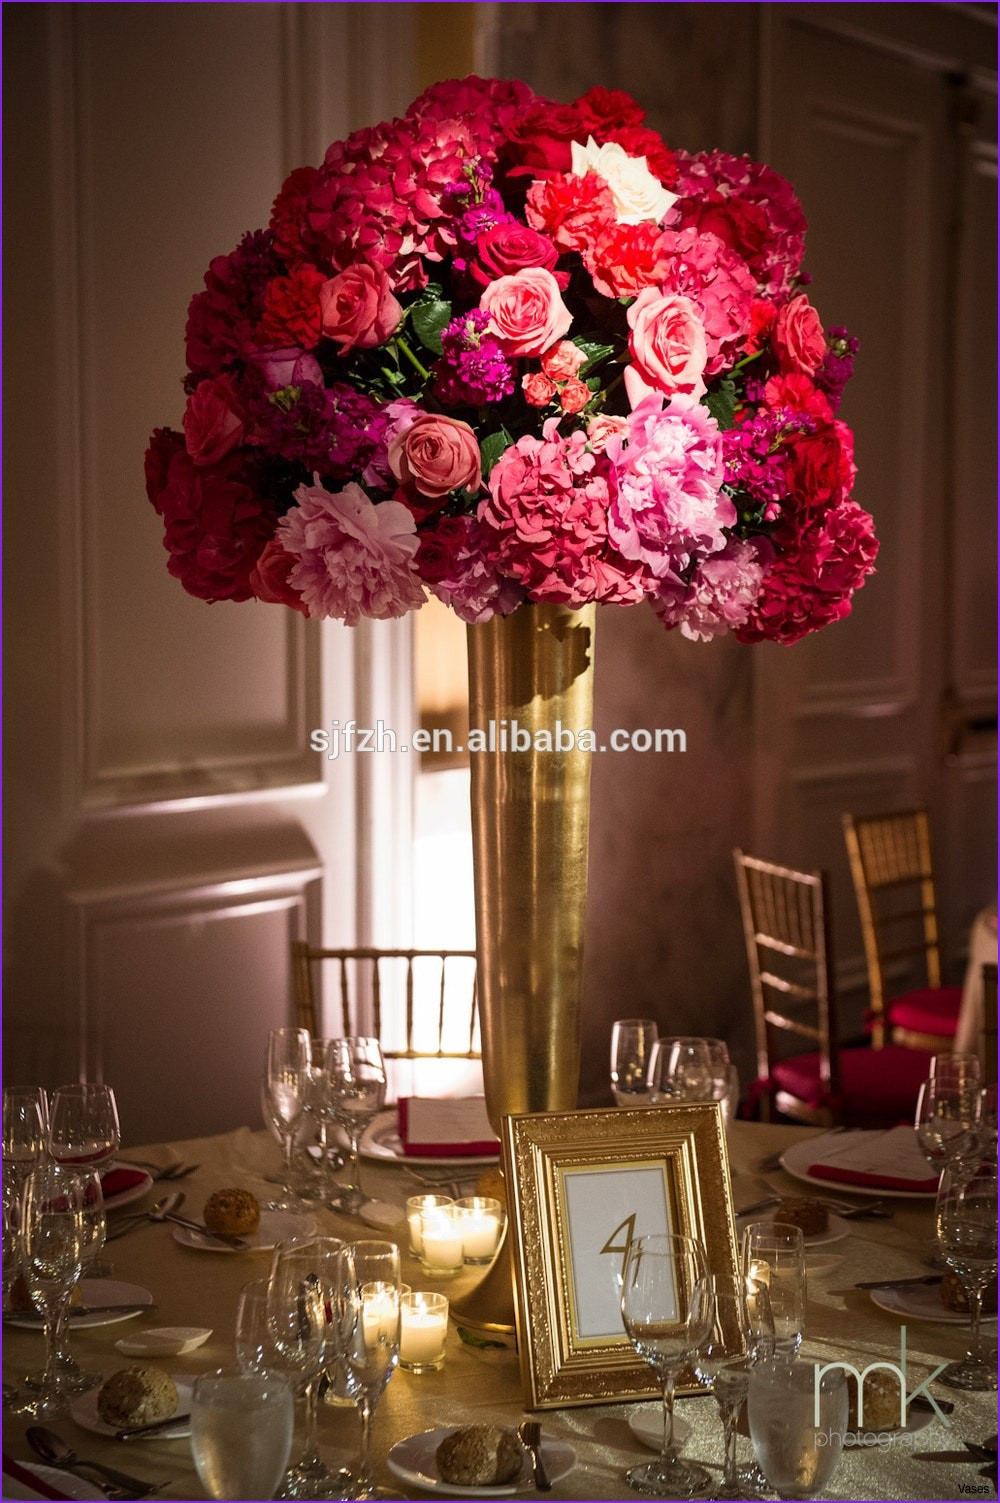 vase centerpiece ideas for weddings of red and white wedding decorations inspirational table centerpiece with red and white wedding decorations inspirational table centerpiece ideas resplendency diy home decor vaseh vases